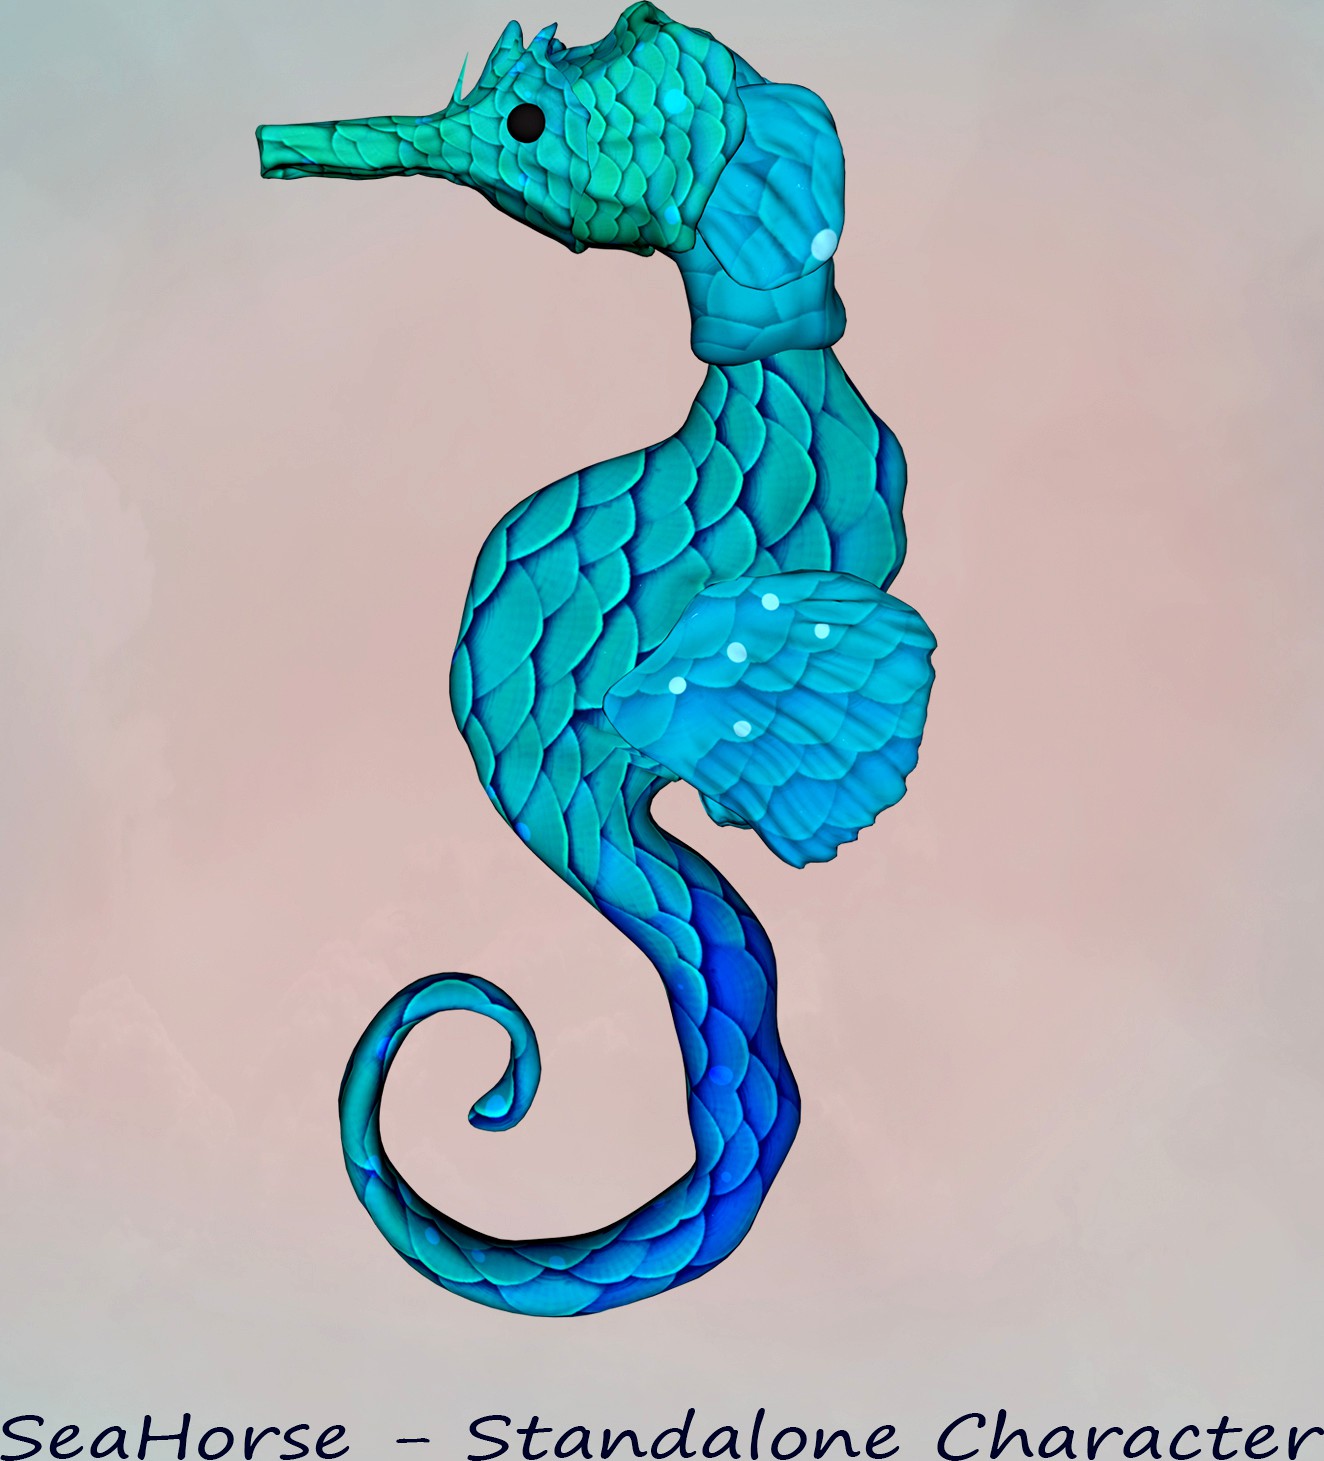 Seahorse - Standalone Character